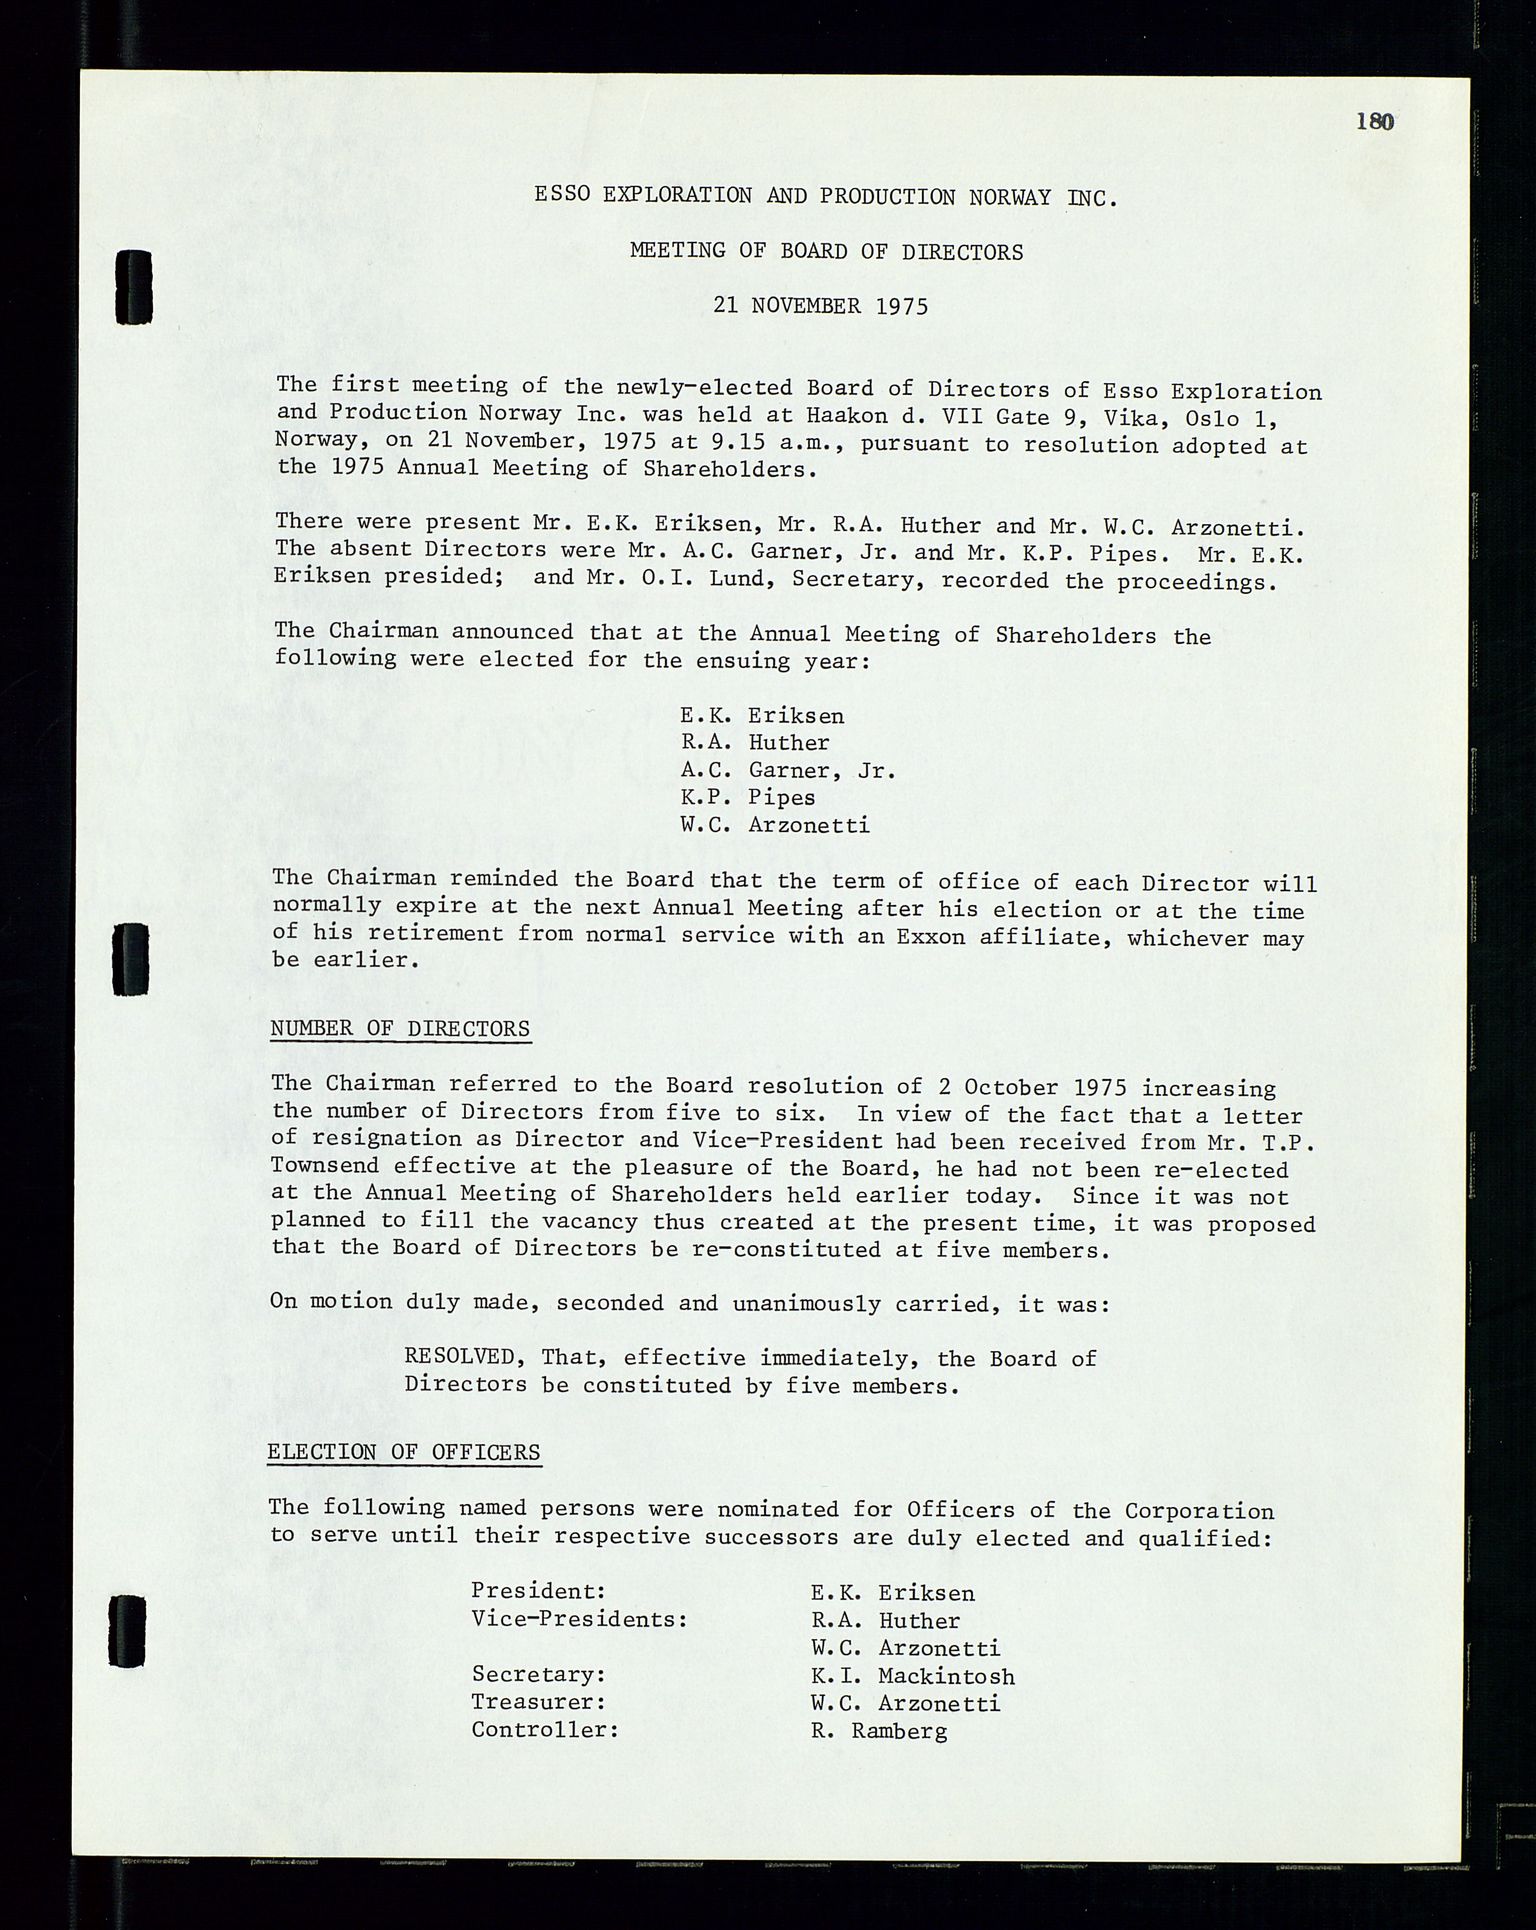 Pa 1512 - Esso Exploration and Production Norway Inc., SAST/A-101917/A/Aa/L0001/0002: Styredokumenter / Corporate records, Board meeting minutes, Agreements, Stocholder meetings, 1975-1979, p. 18